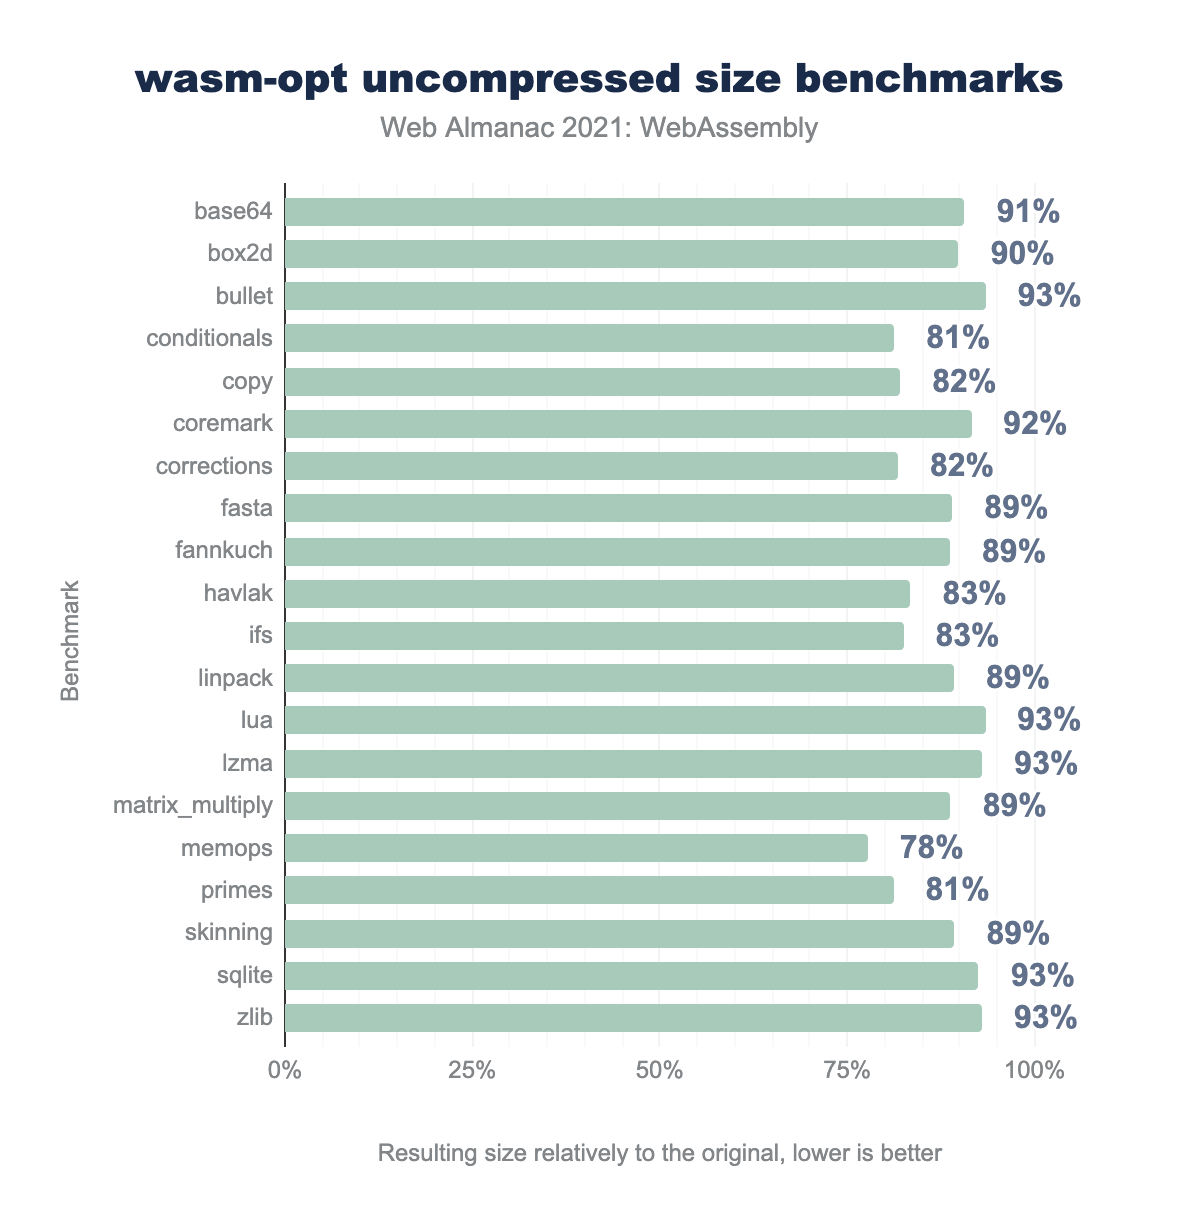 wasm-opt uncompressed size benchmarks.